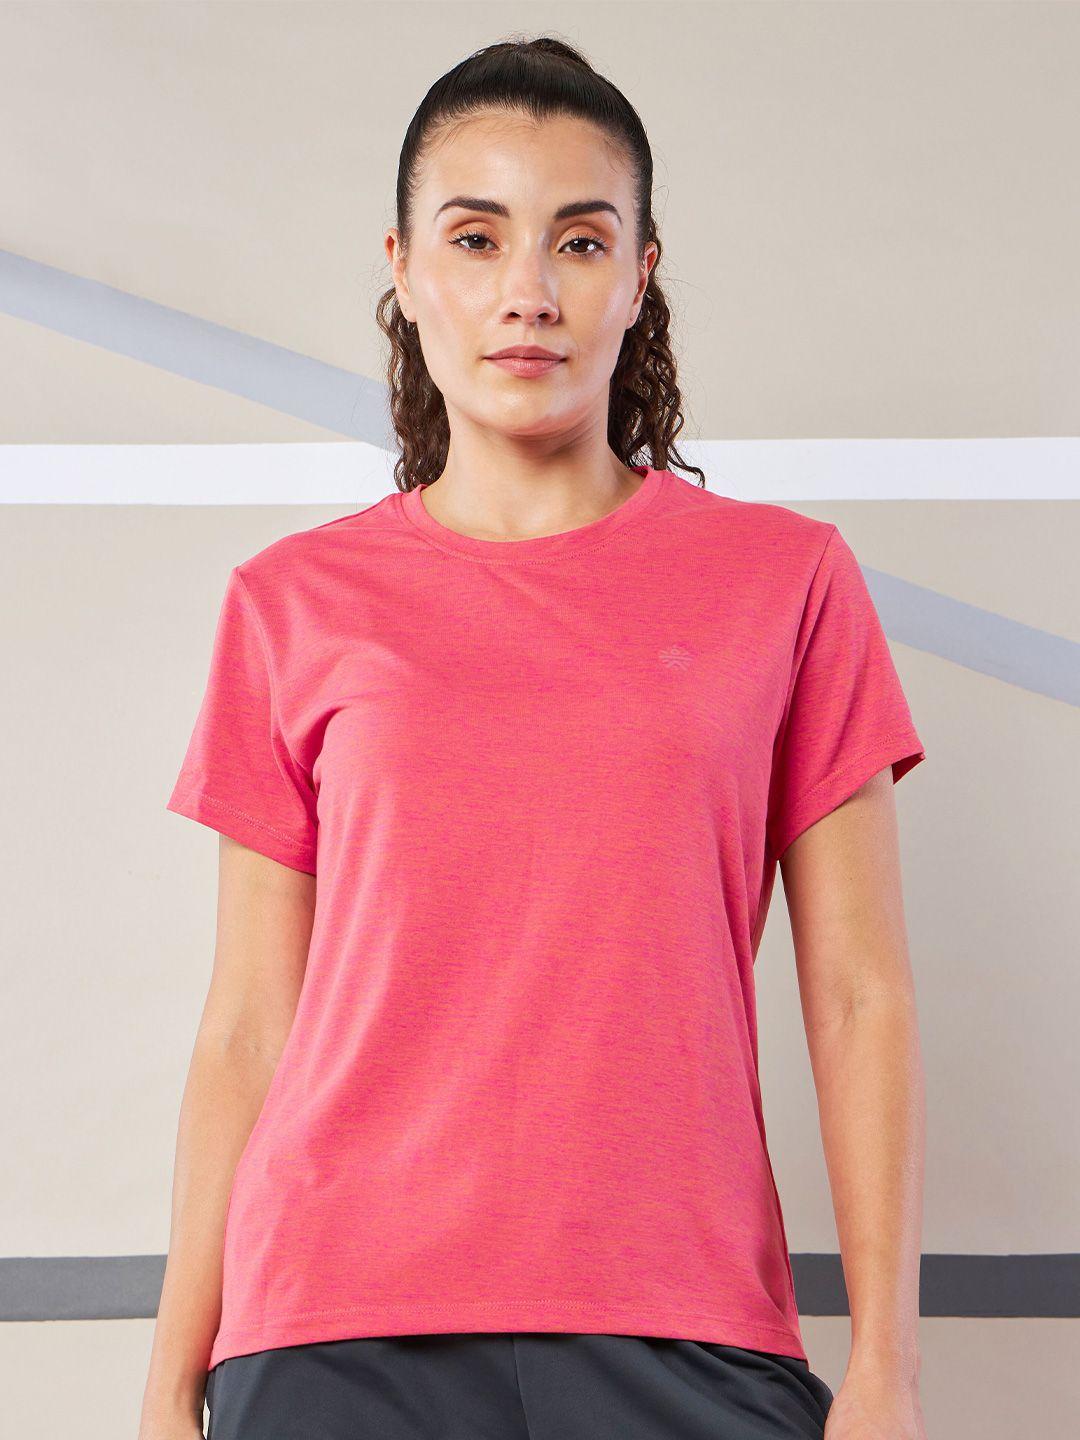 cultsport train all dry fit round neck sports t-shirt